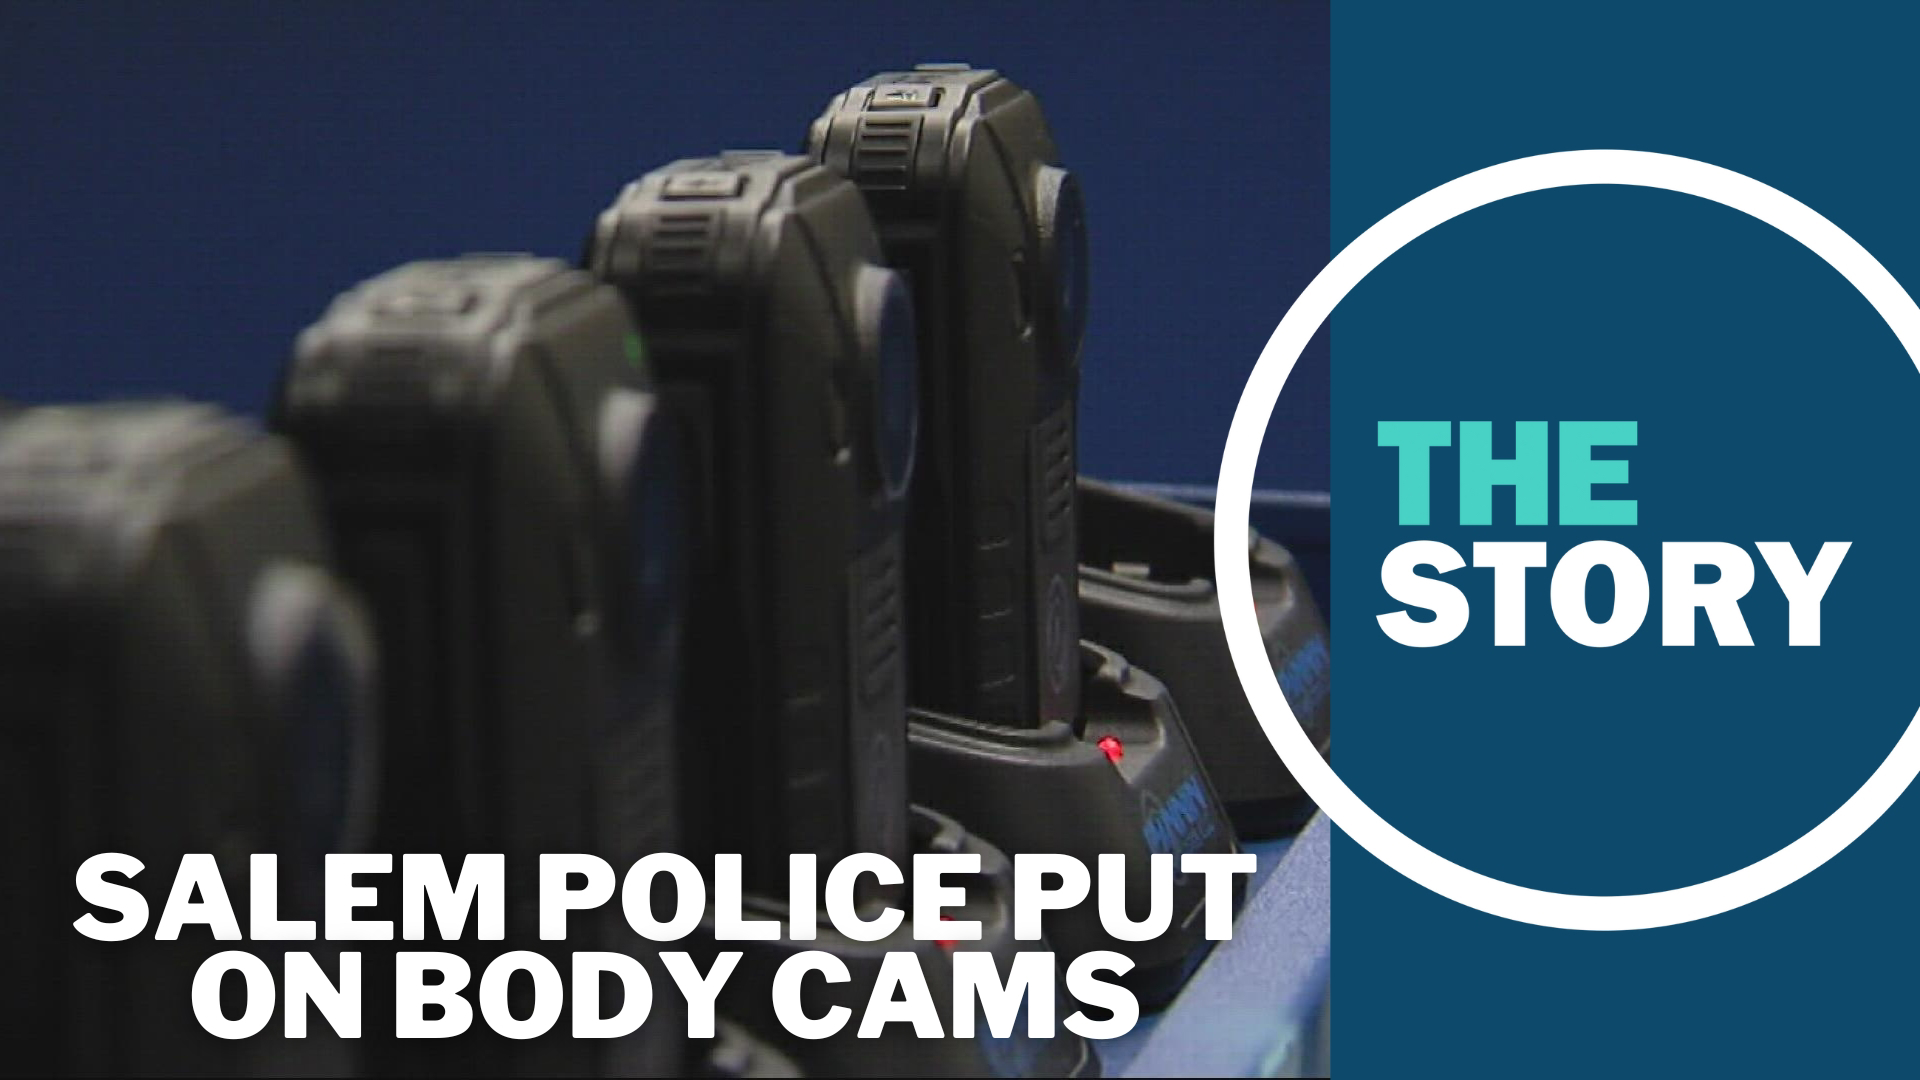 Portland remains the largest city in the U.S. without body cams on its municipal police officers. Now Salem has beaten it to the punch.